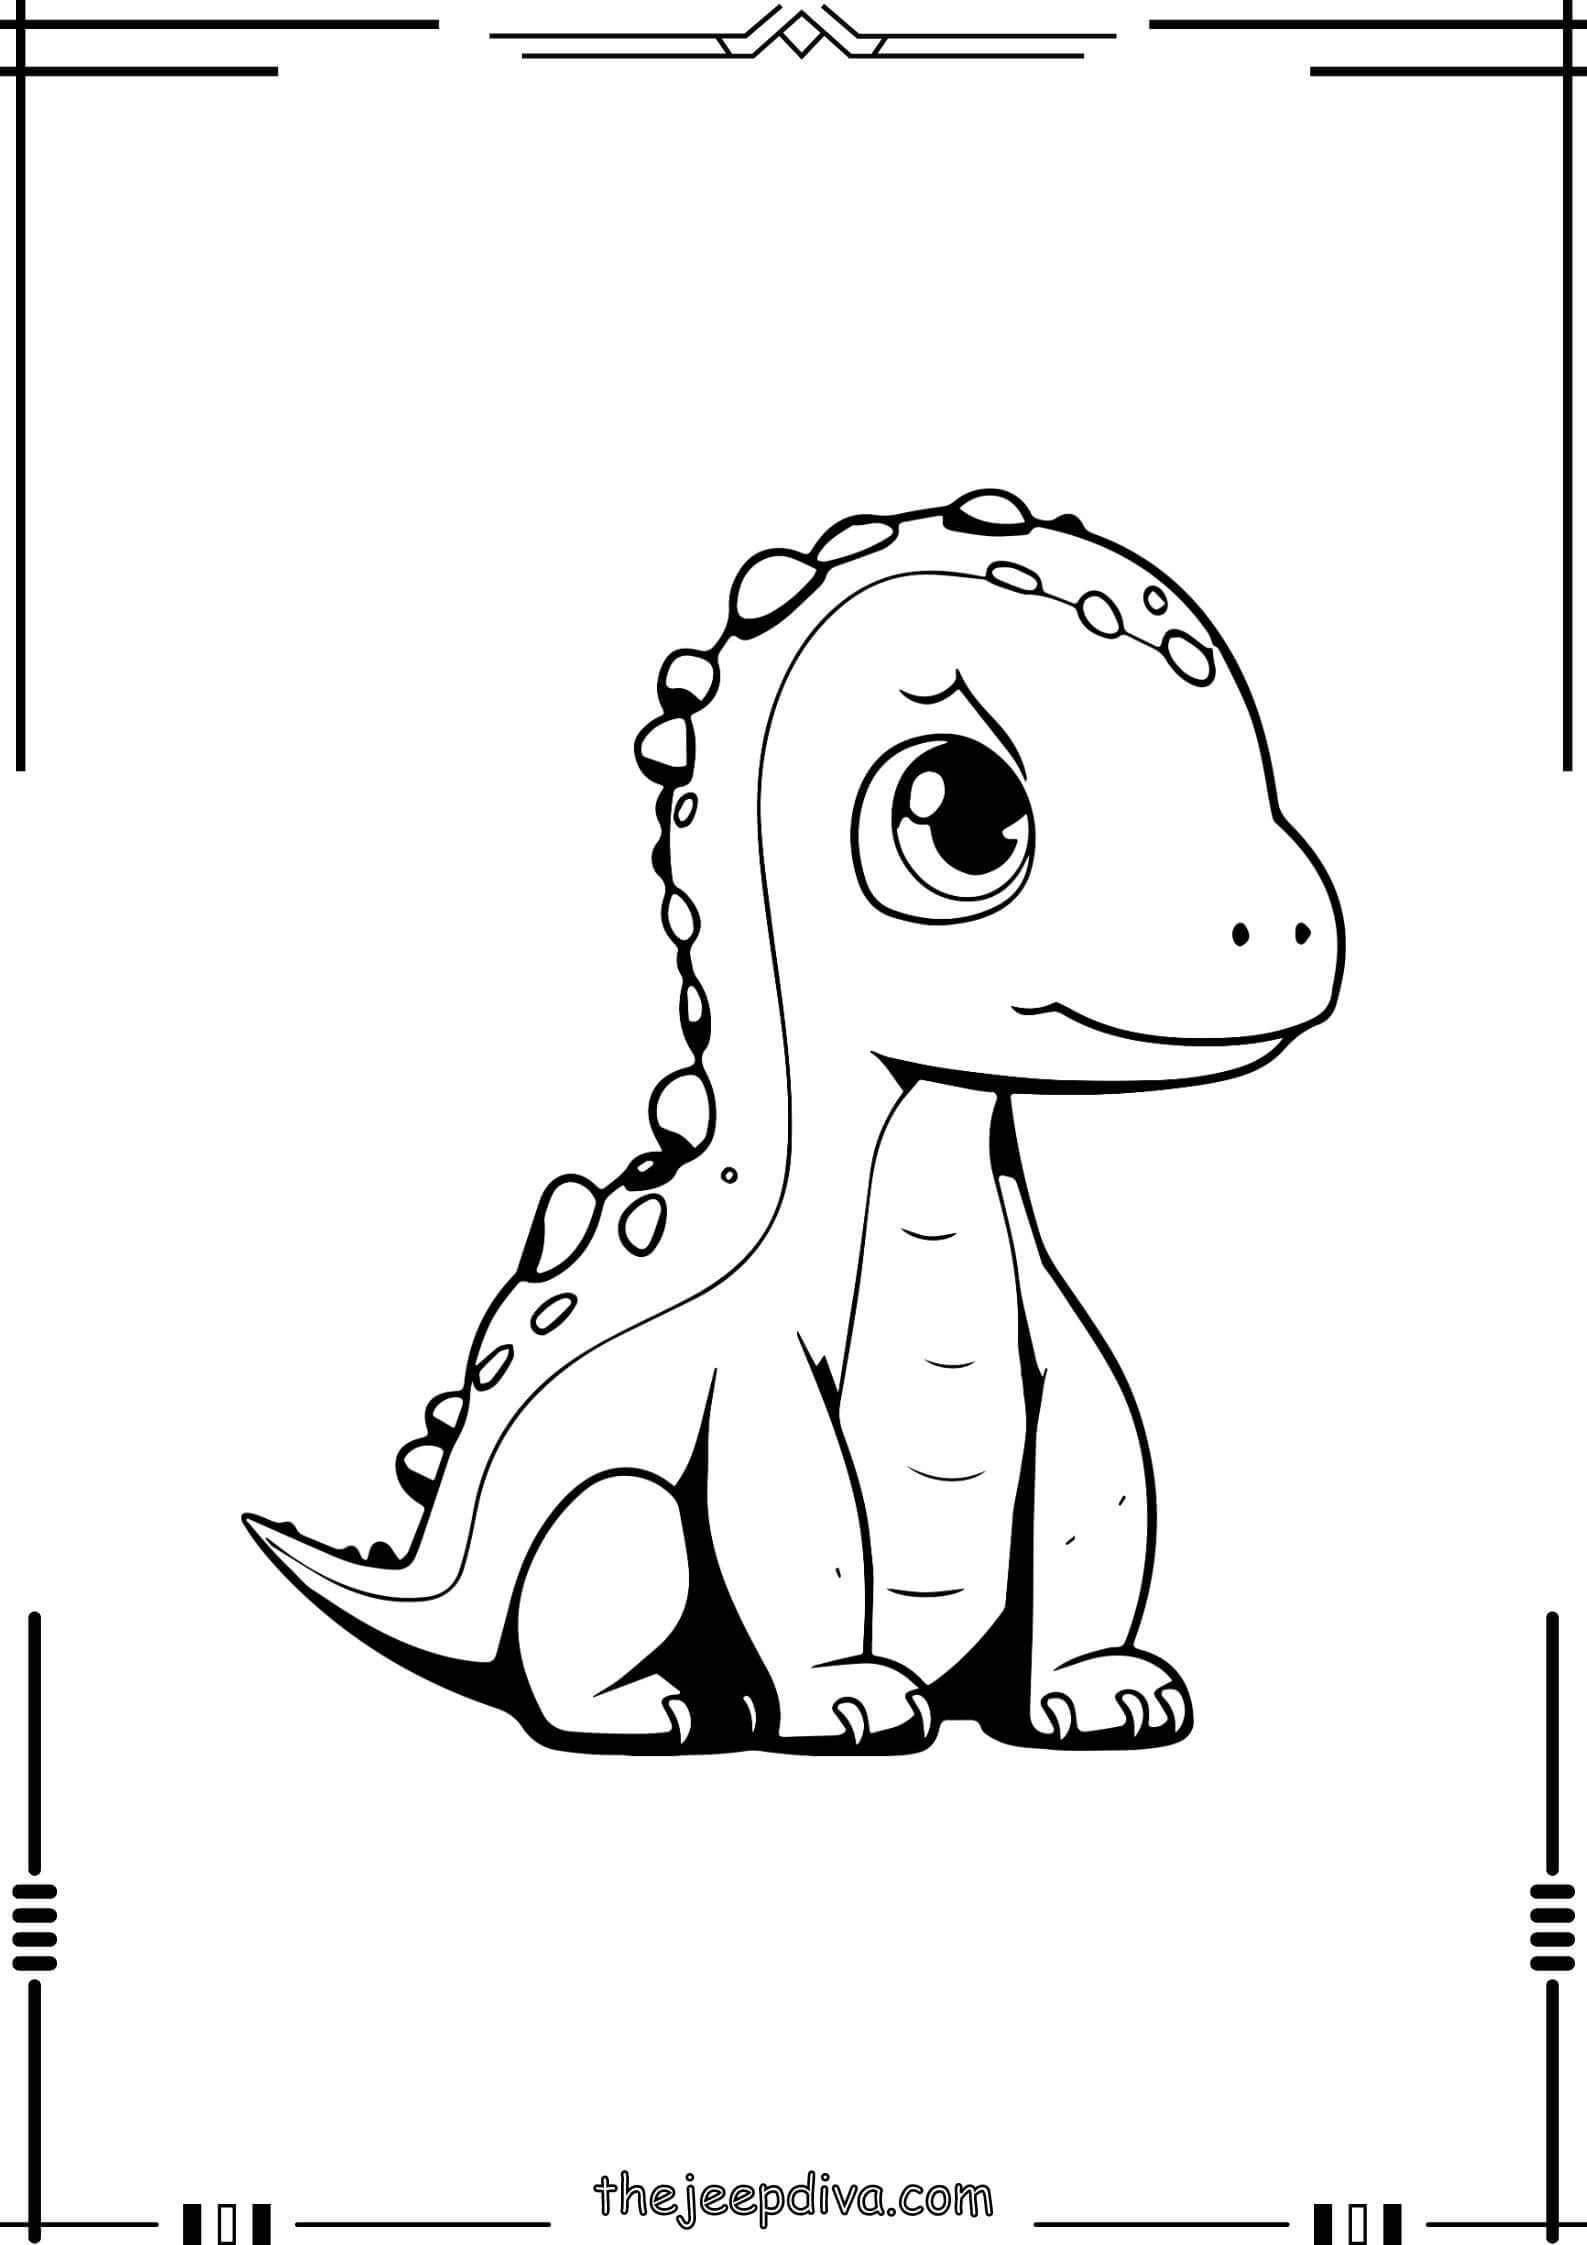 Dinosaur-Colouring-Pages-Easy-6